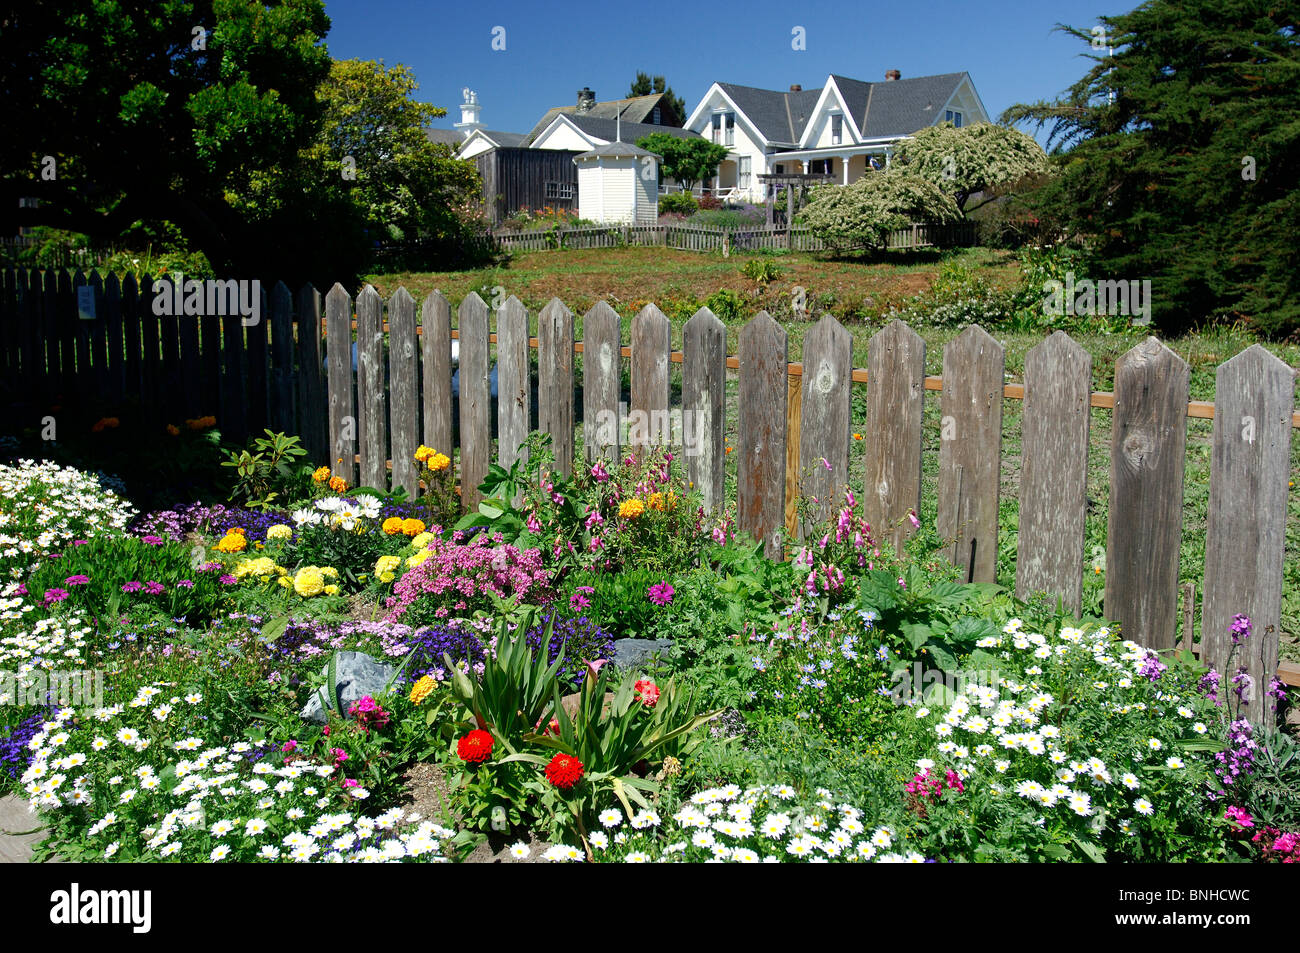 Usa Mendocino California Flowers Flowering Nature Fence Garden House Houses United States of America Stock Photo